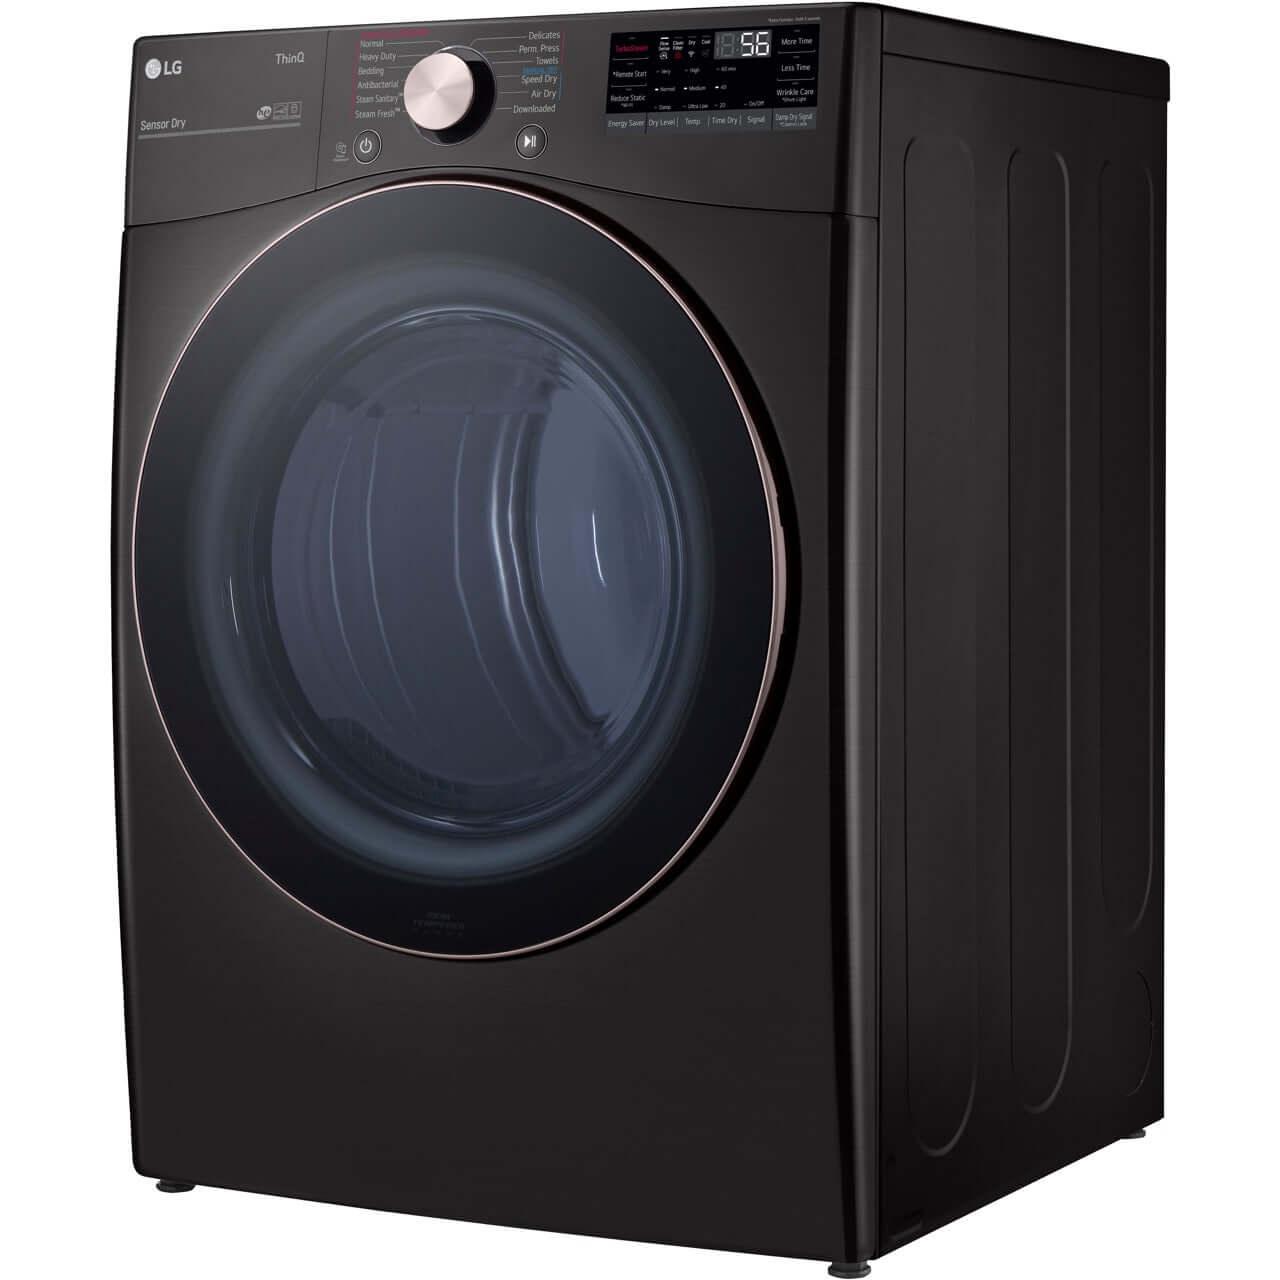 LG 27 In. 7.4-Cu. Ft. Front Load Gas Dryer with TurboSteam and Built-In Intelligence in Black Steel (DLGX4001B)